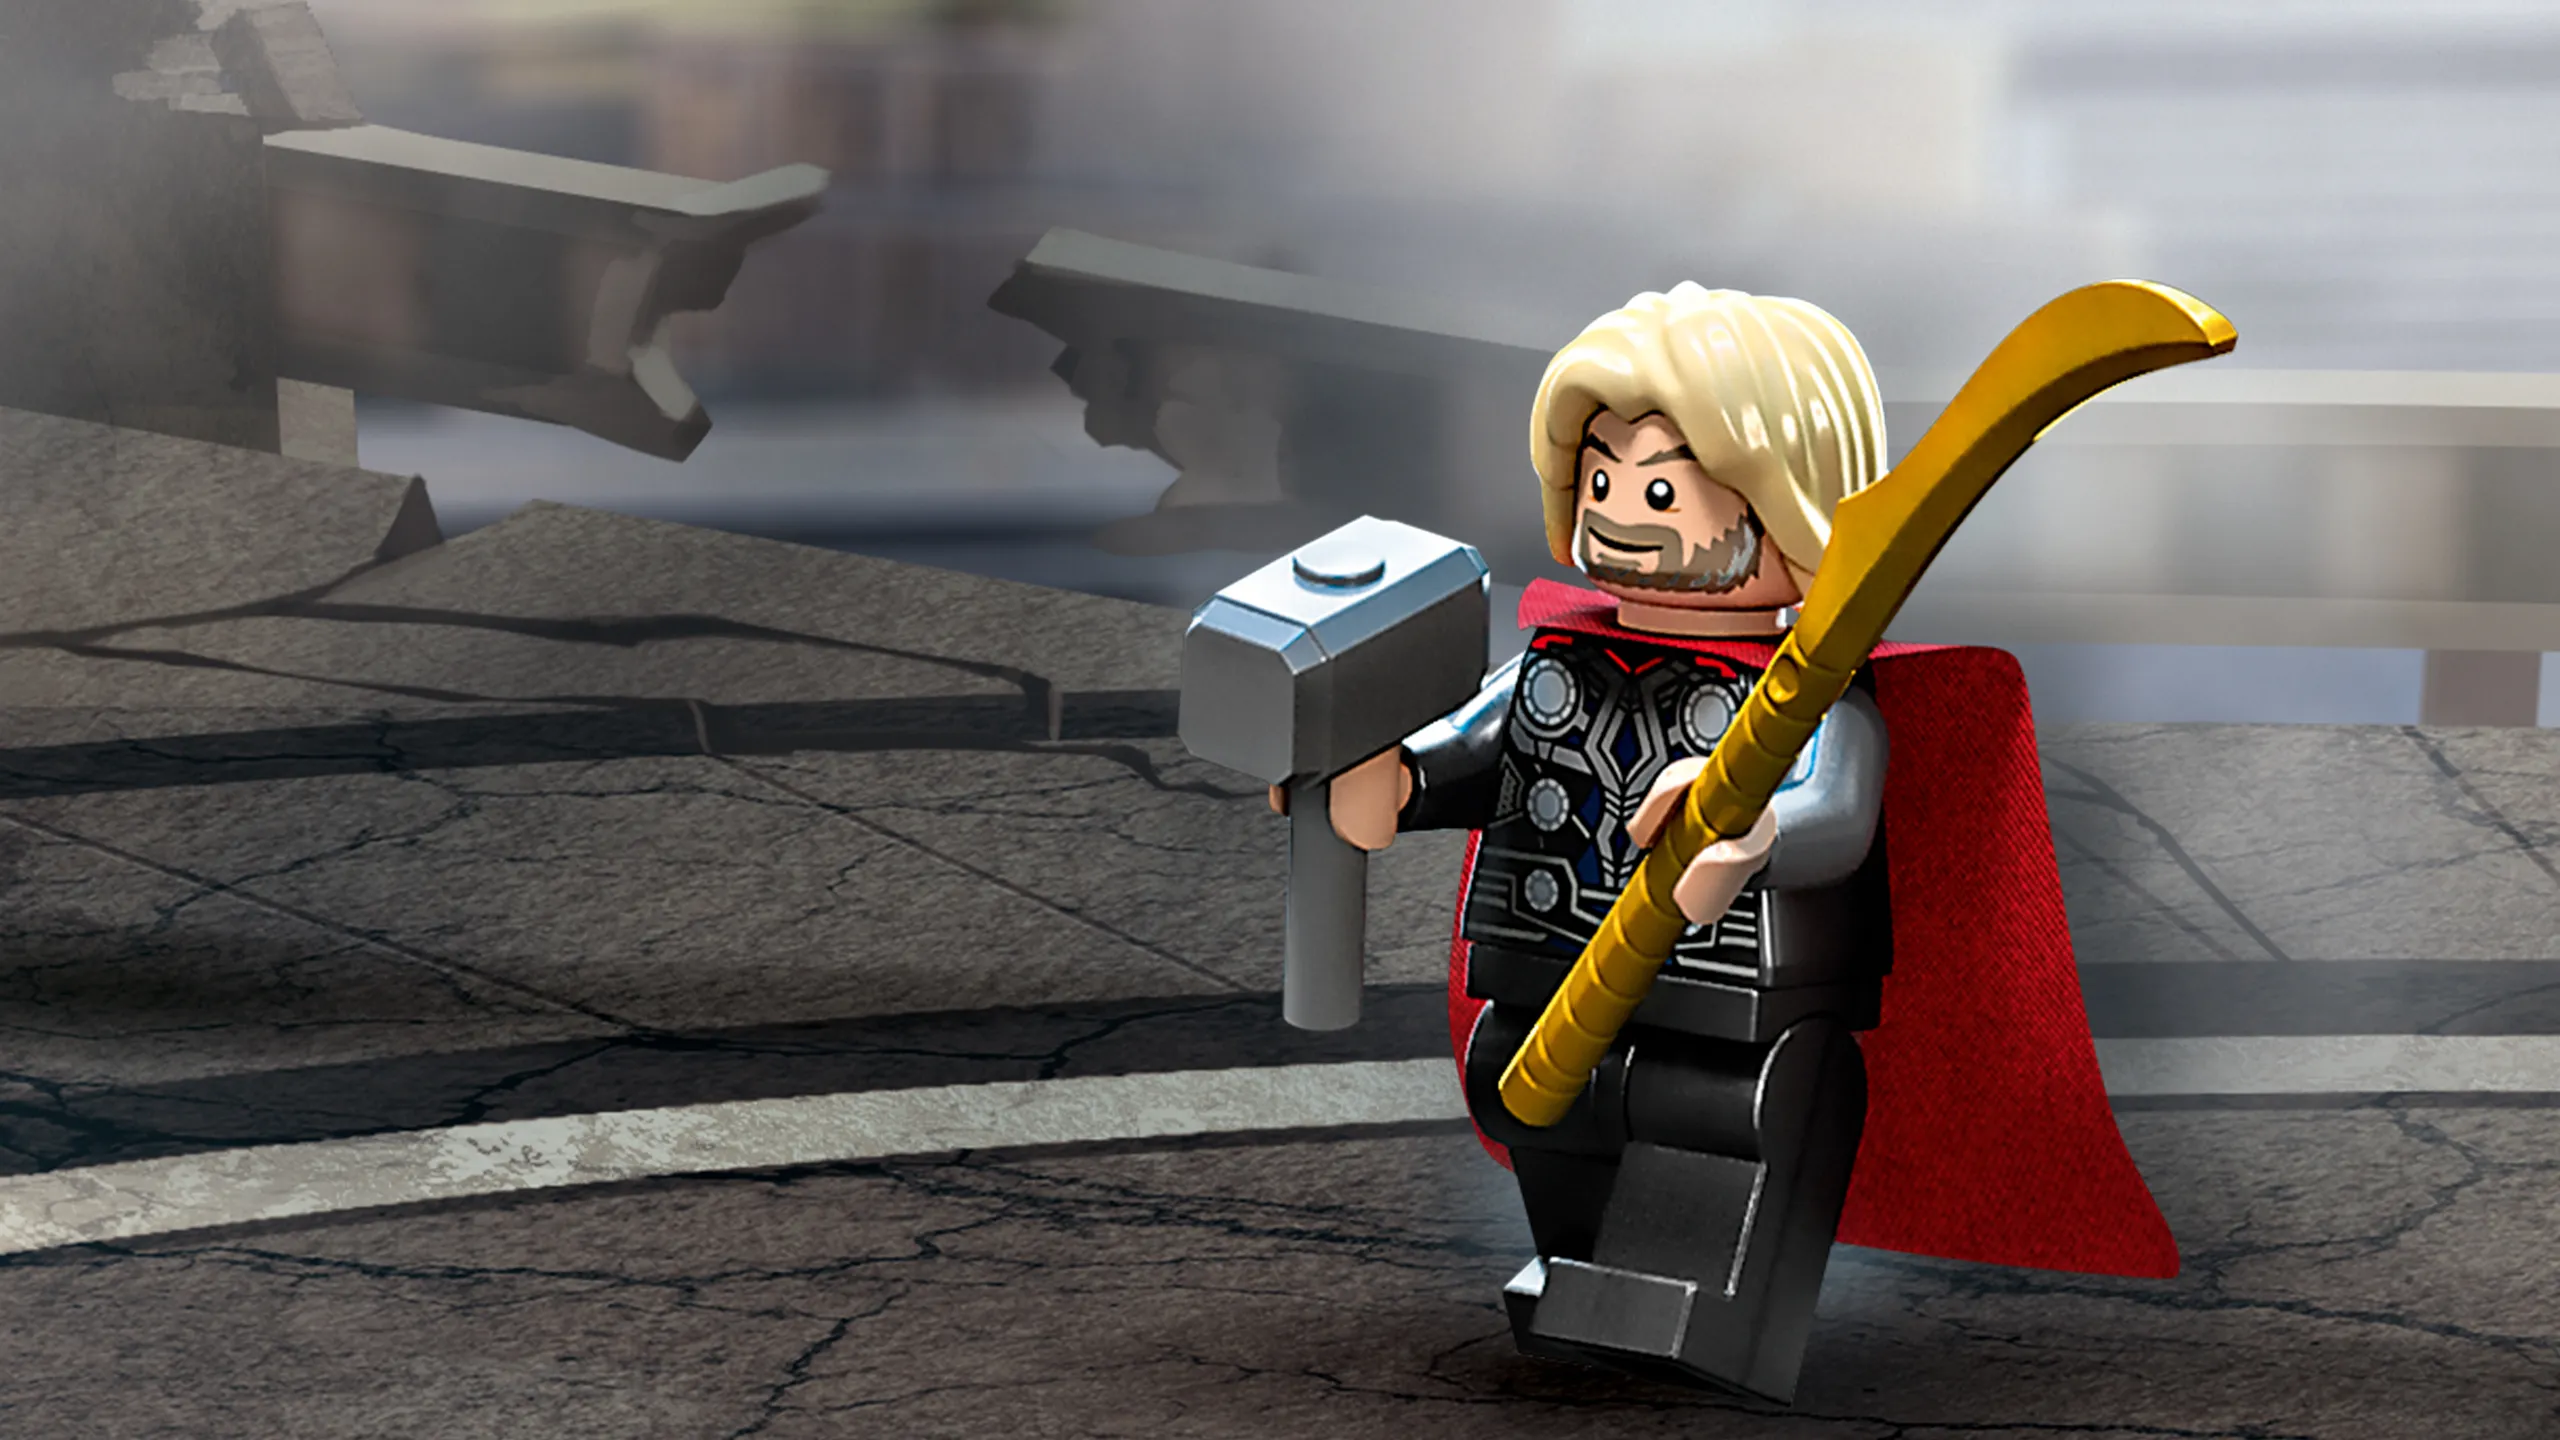 Marvel's Mightiest Super Heroes Assemble For LEGO® Marvel Collection